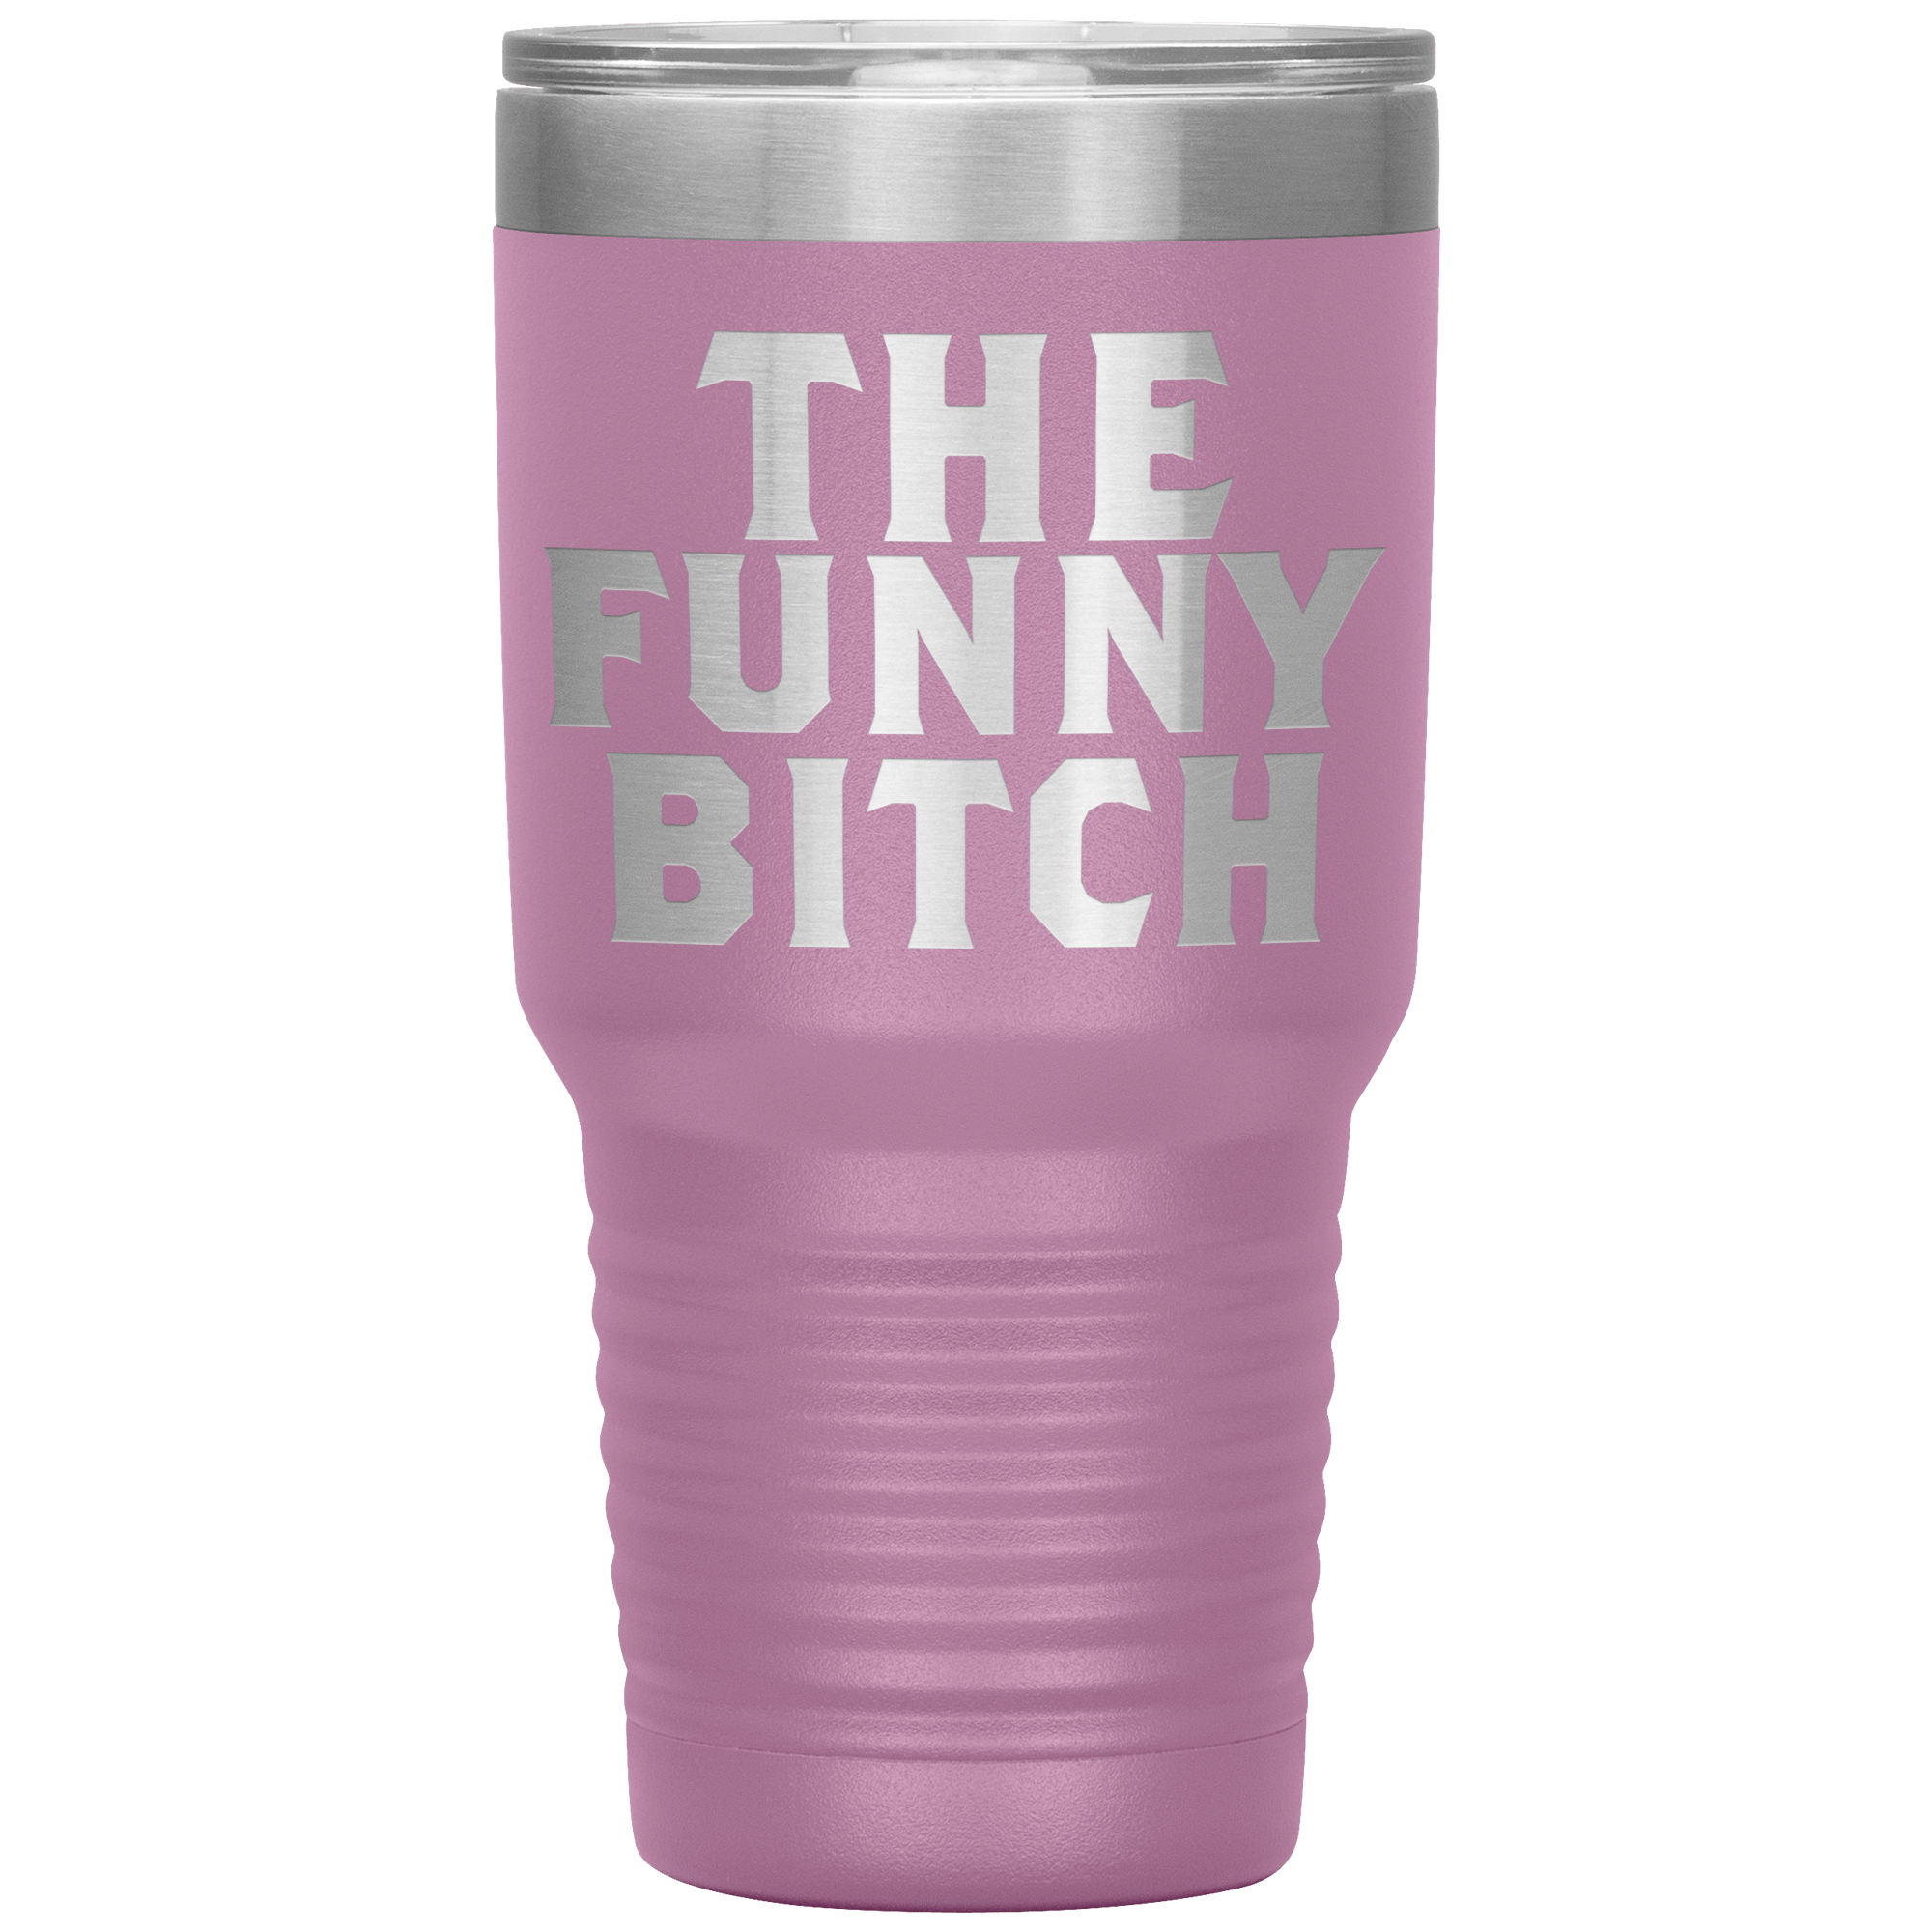 " THE FUNNY BITCH " TUMBLER